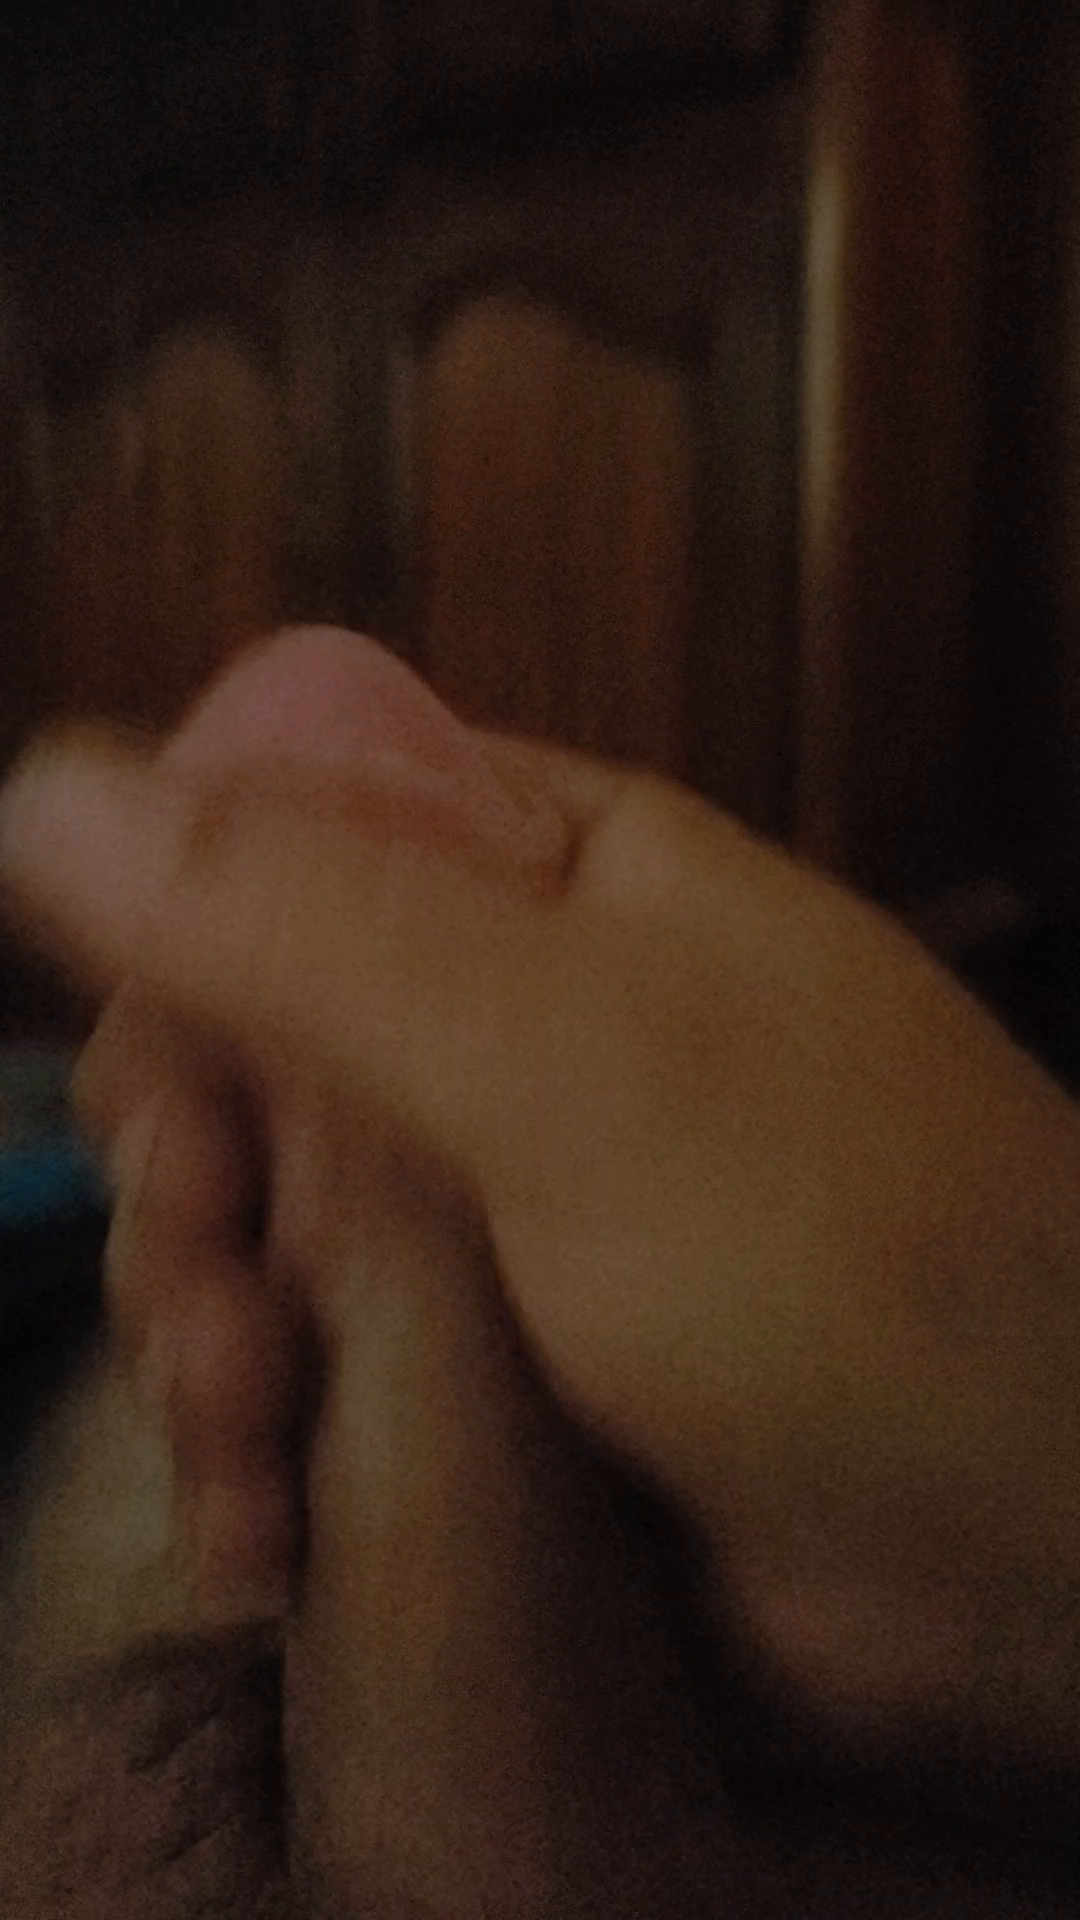 Video by Sexywifefantasy69 with the username @Sexywifefantasy69,  July 31, 2019 at 10:50 PM. The post is about the topic Amateur Videos and the text says 'Couldnt help myself rhis morning when wife went to work'